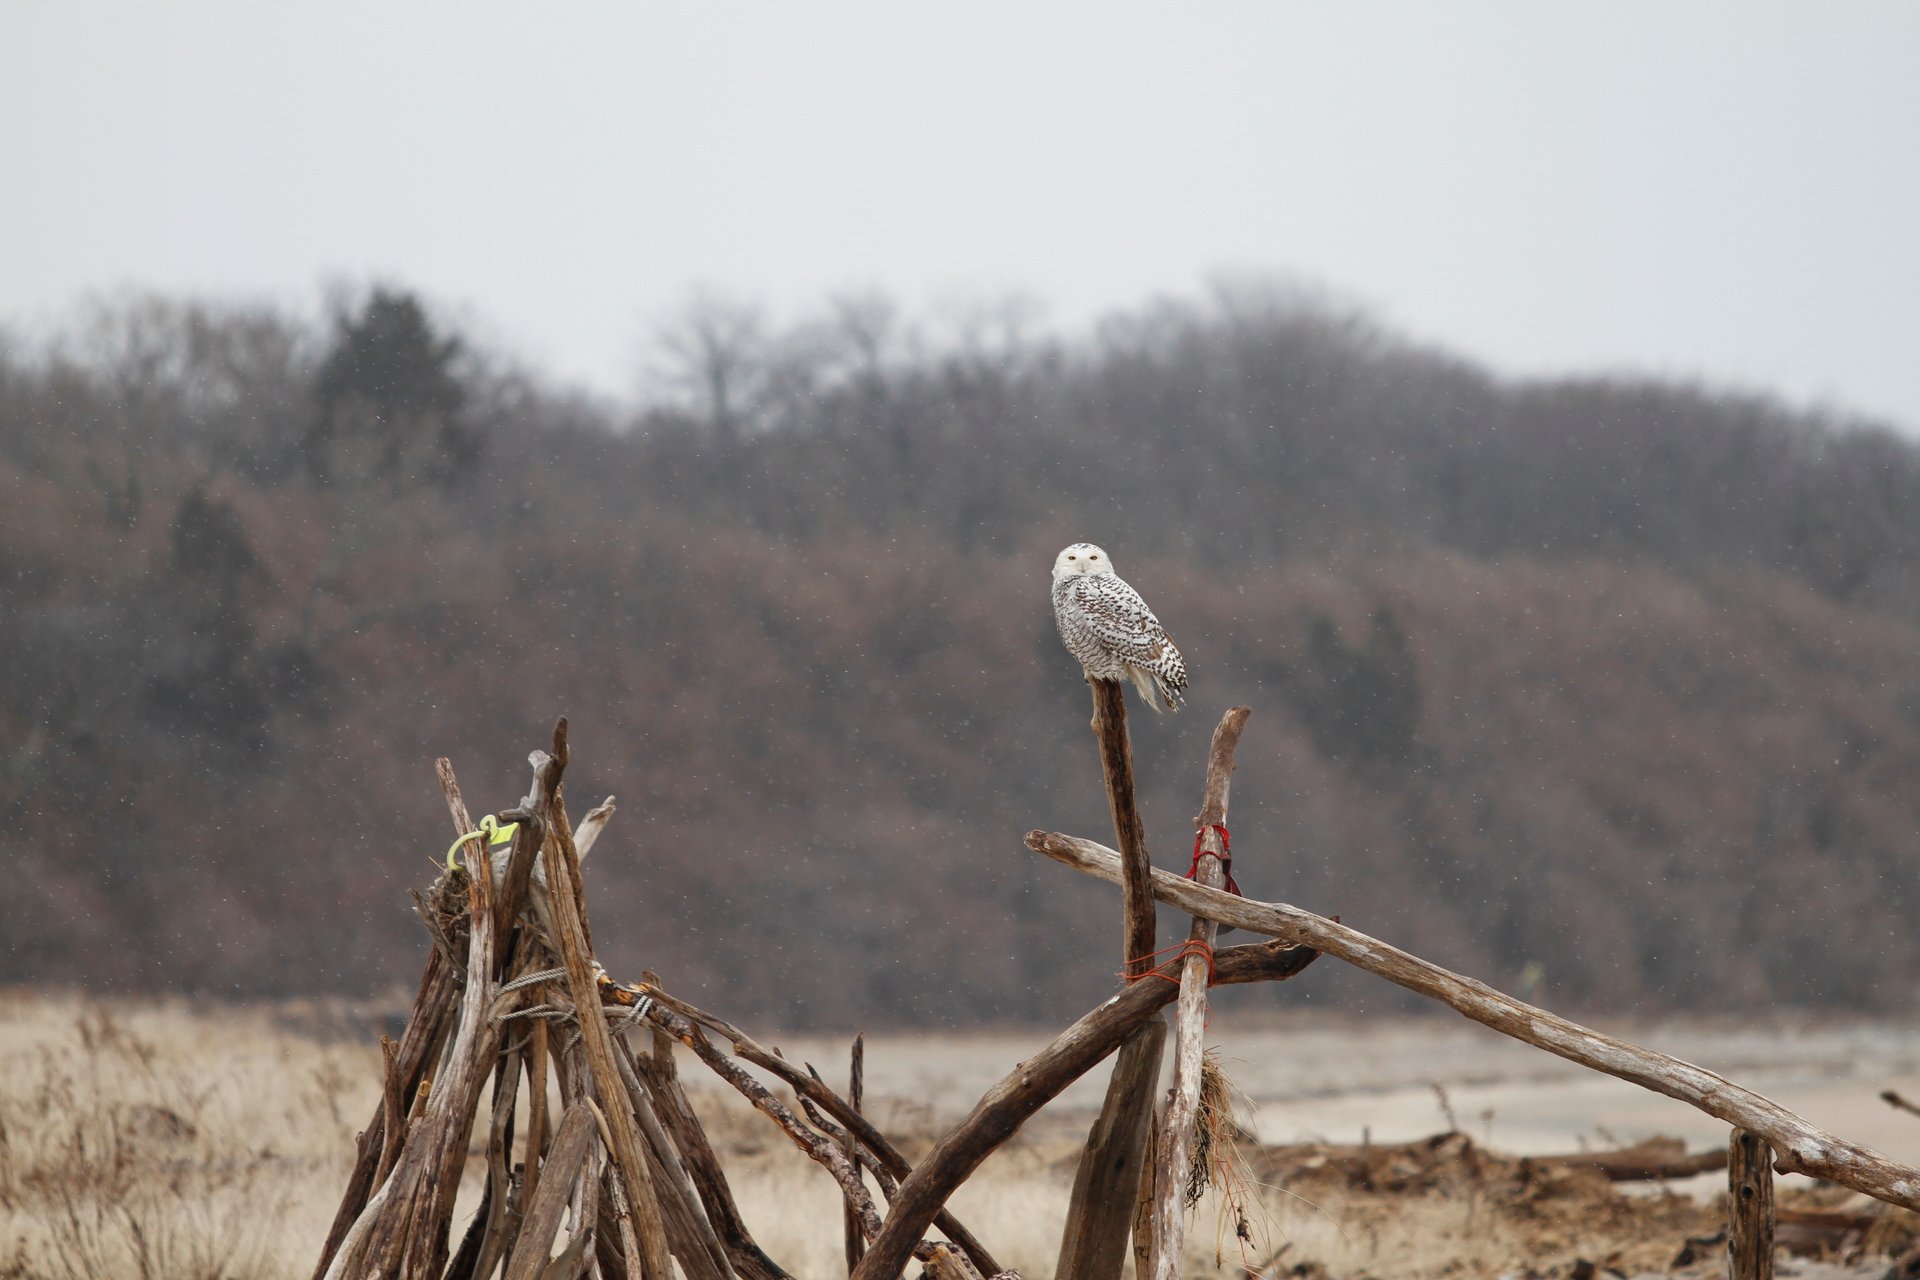 A Snowy Owl on top of some fallen wooden logs making a standing triangle. Bare trees off in the distance.